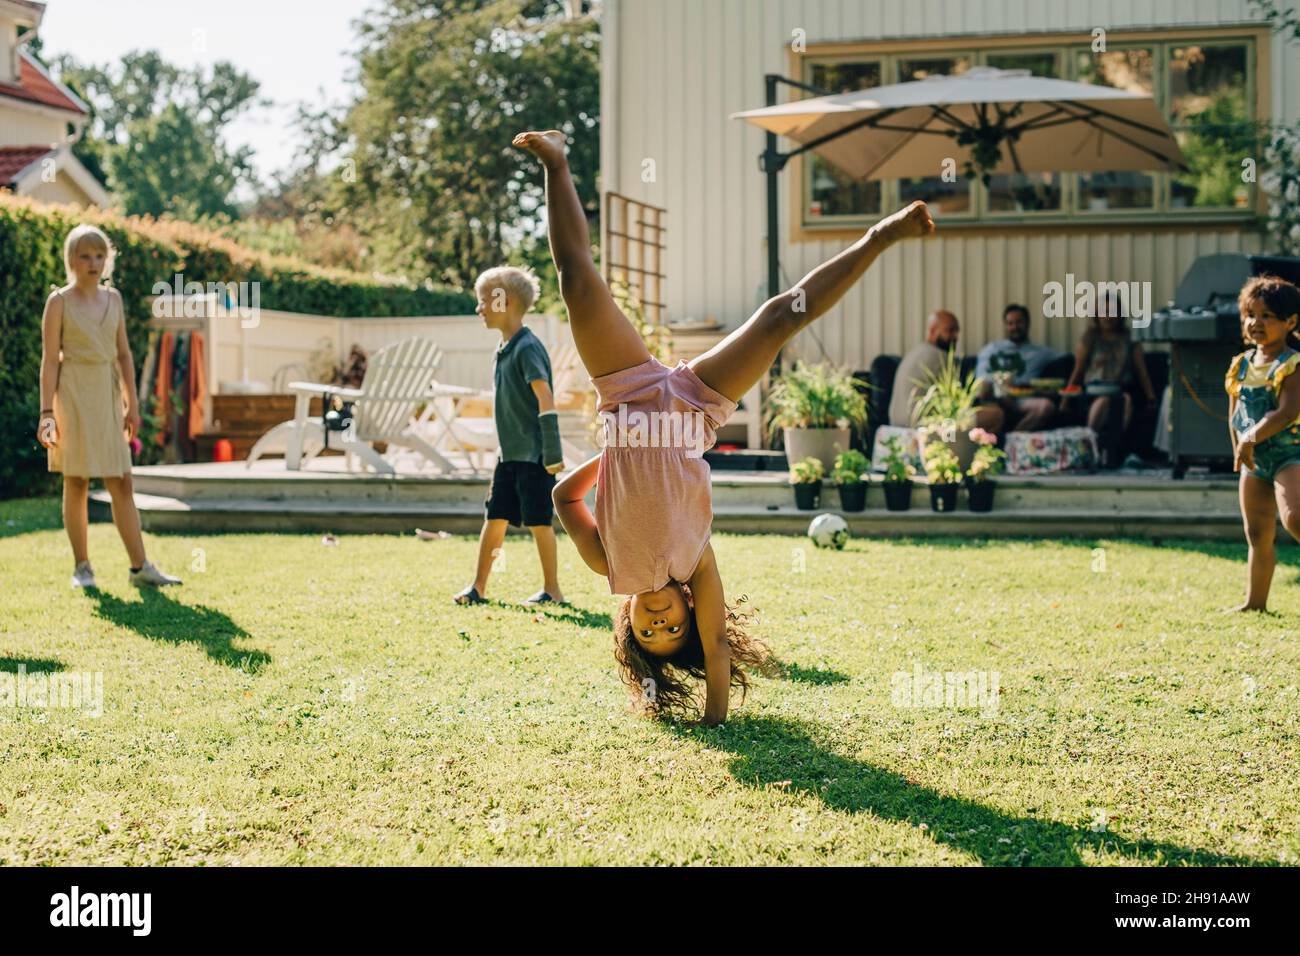 Girl doing cartwheel while playing with friends in backyard on sunny day Stock Photo